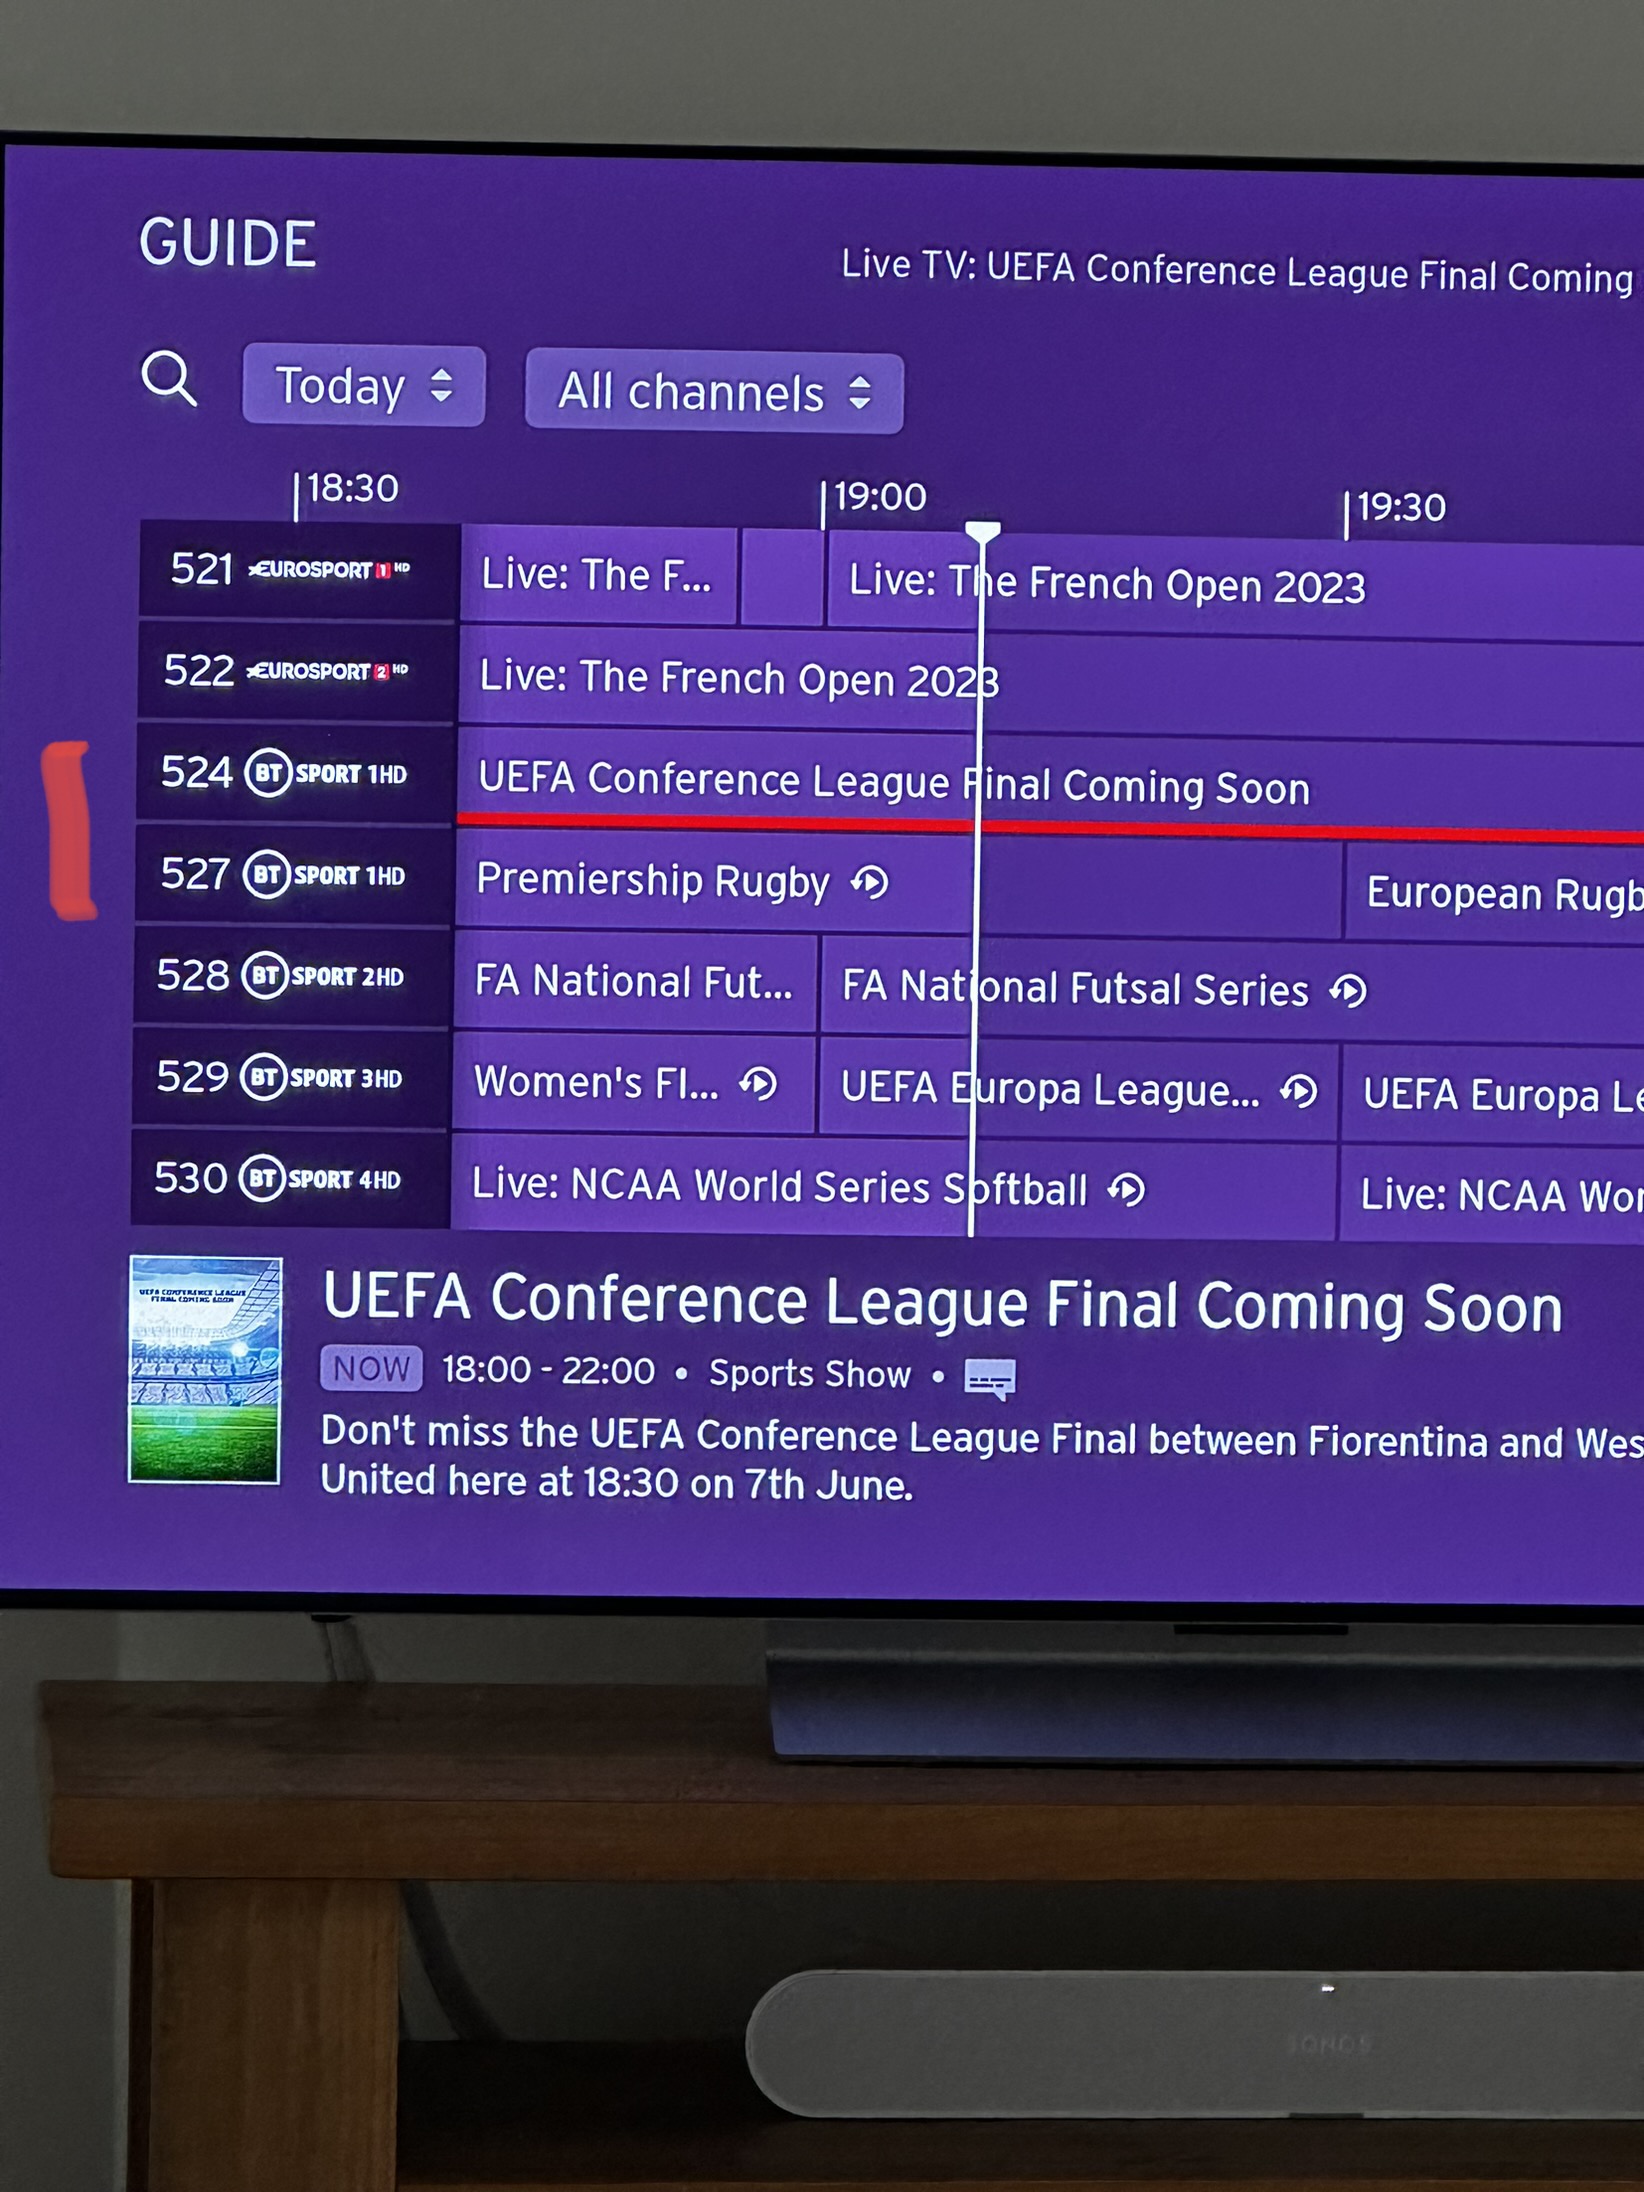 BT Sport release free POS material for European football